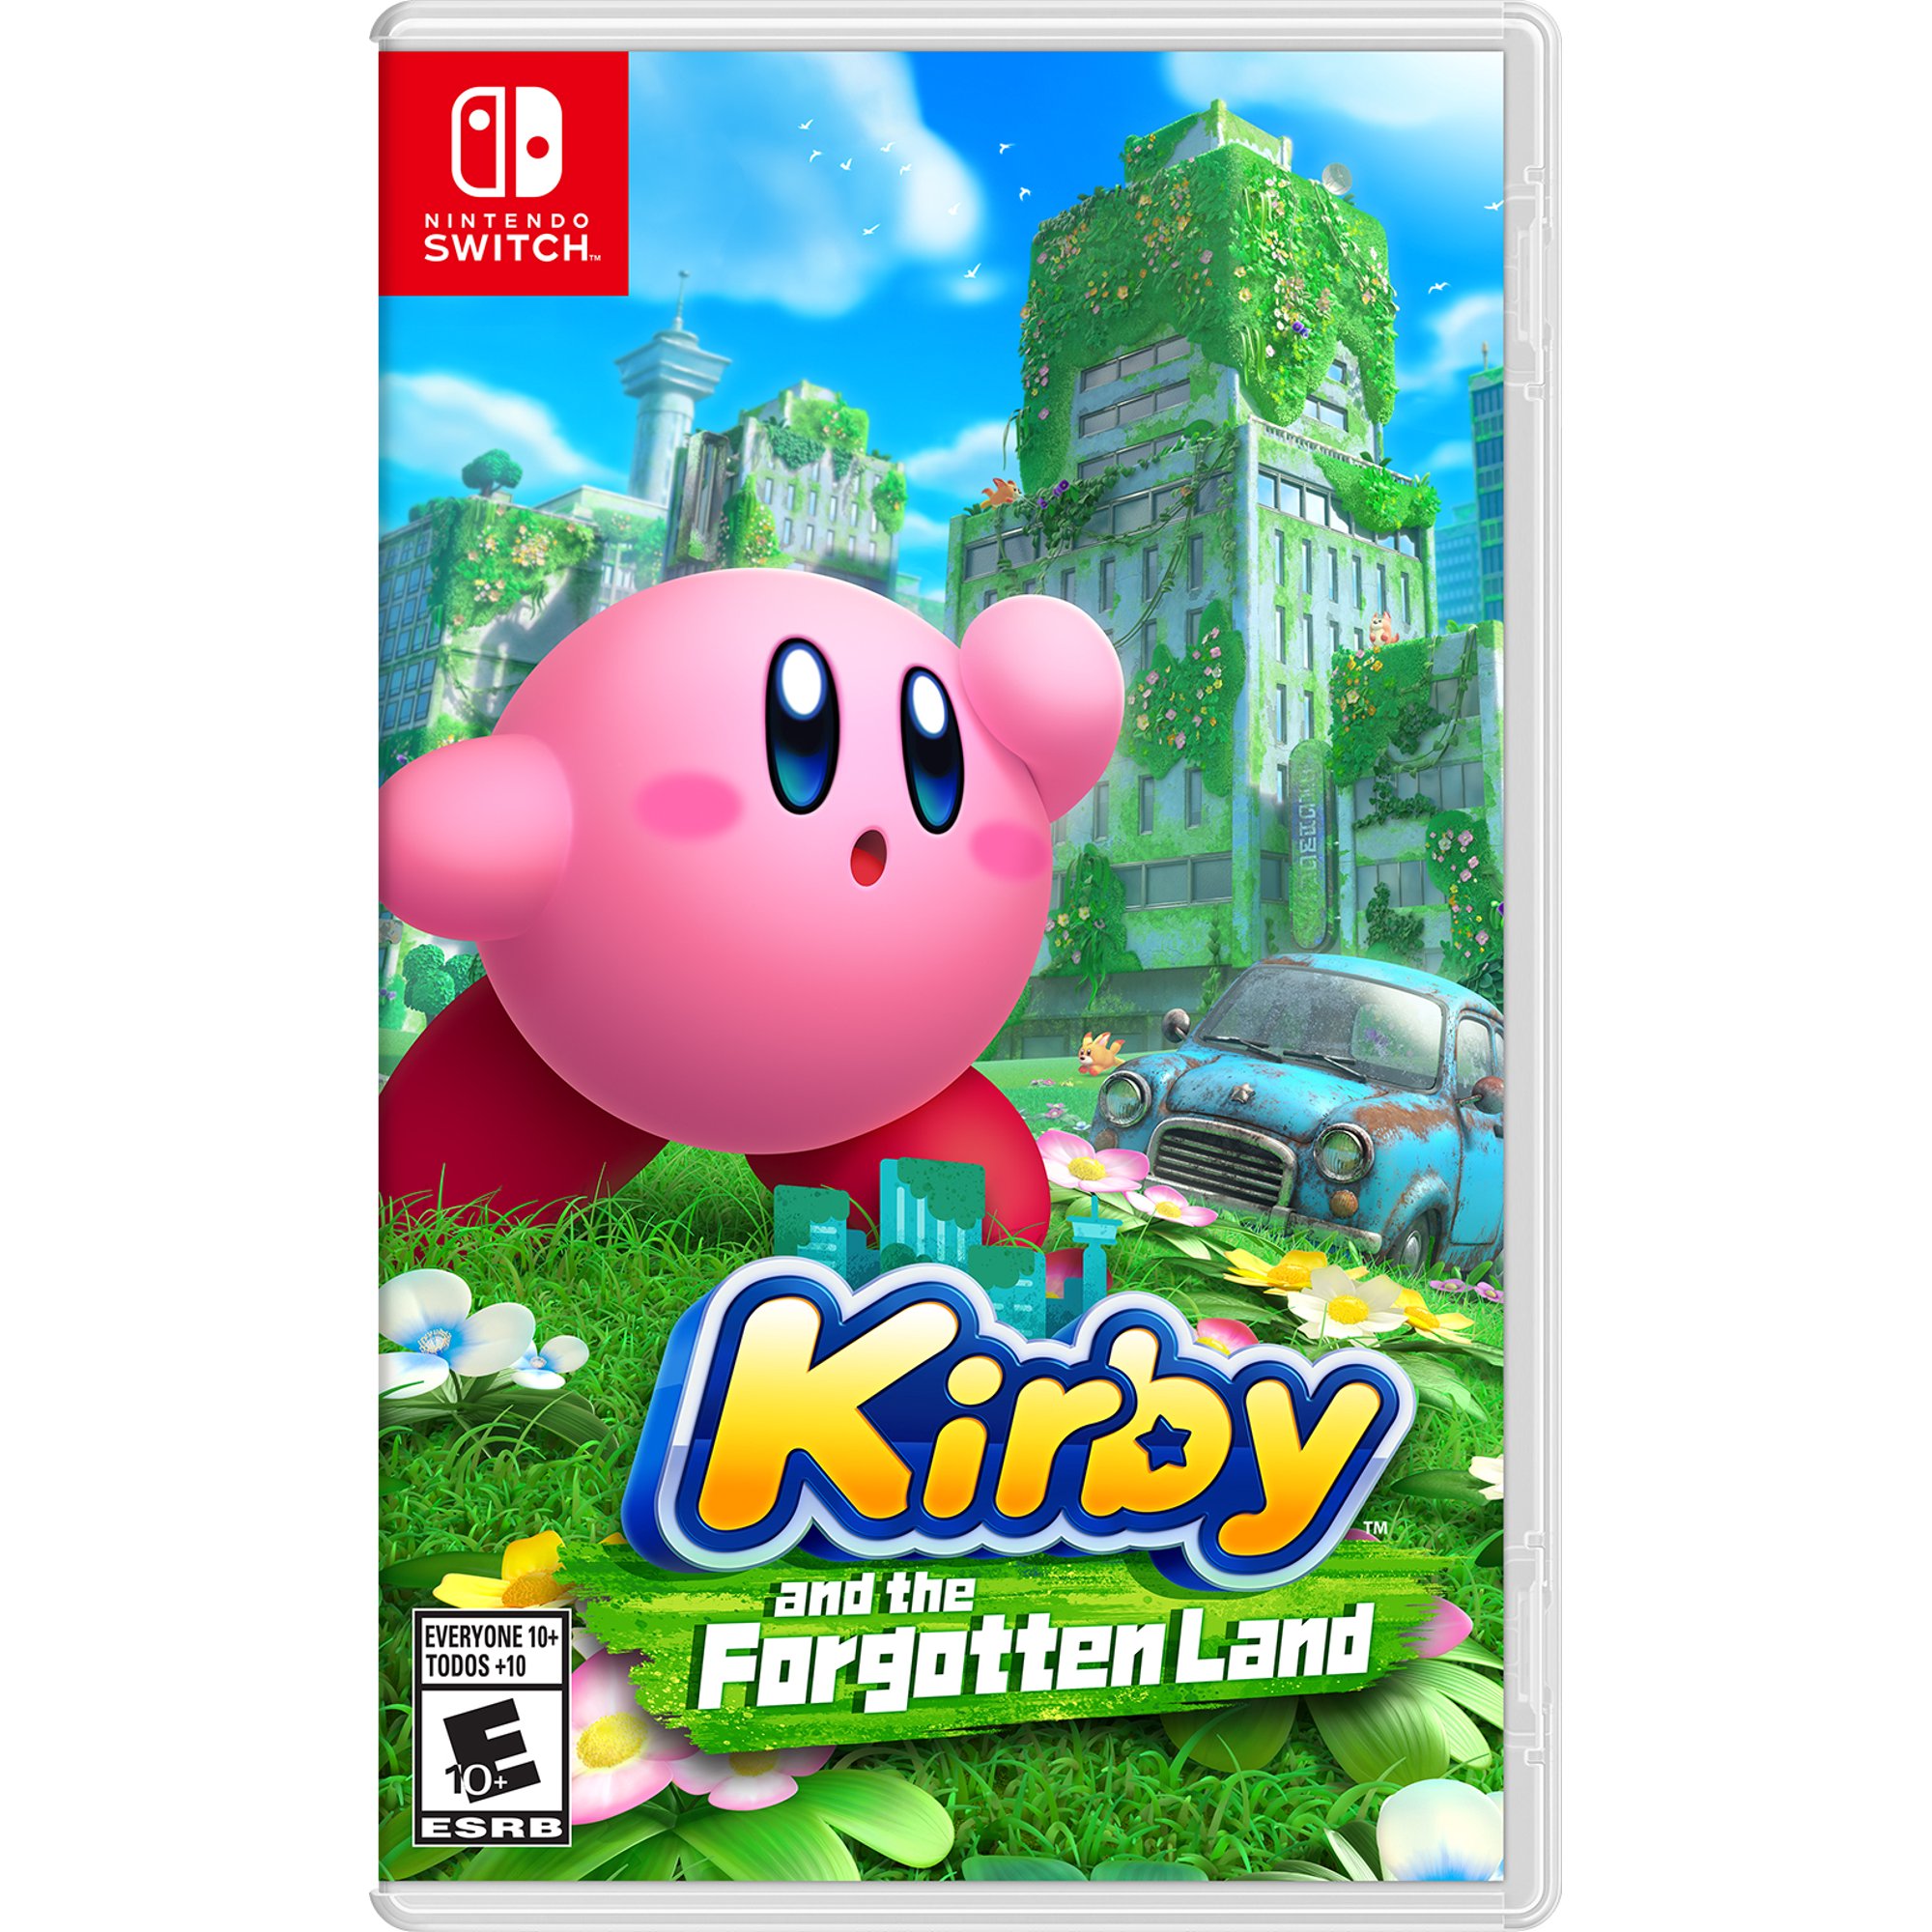 Kirby and the Forgotten Land with Pre-Order Bonus Kirby Popsocket - Nintendo Switch - image 3 of 13